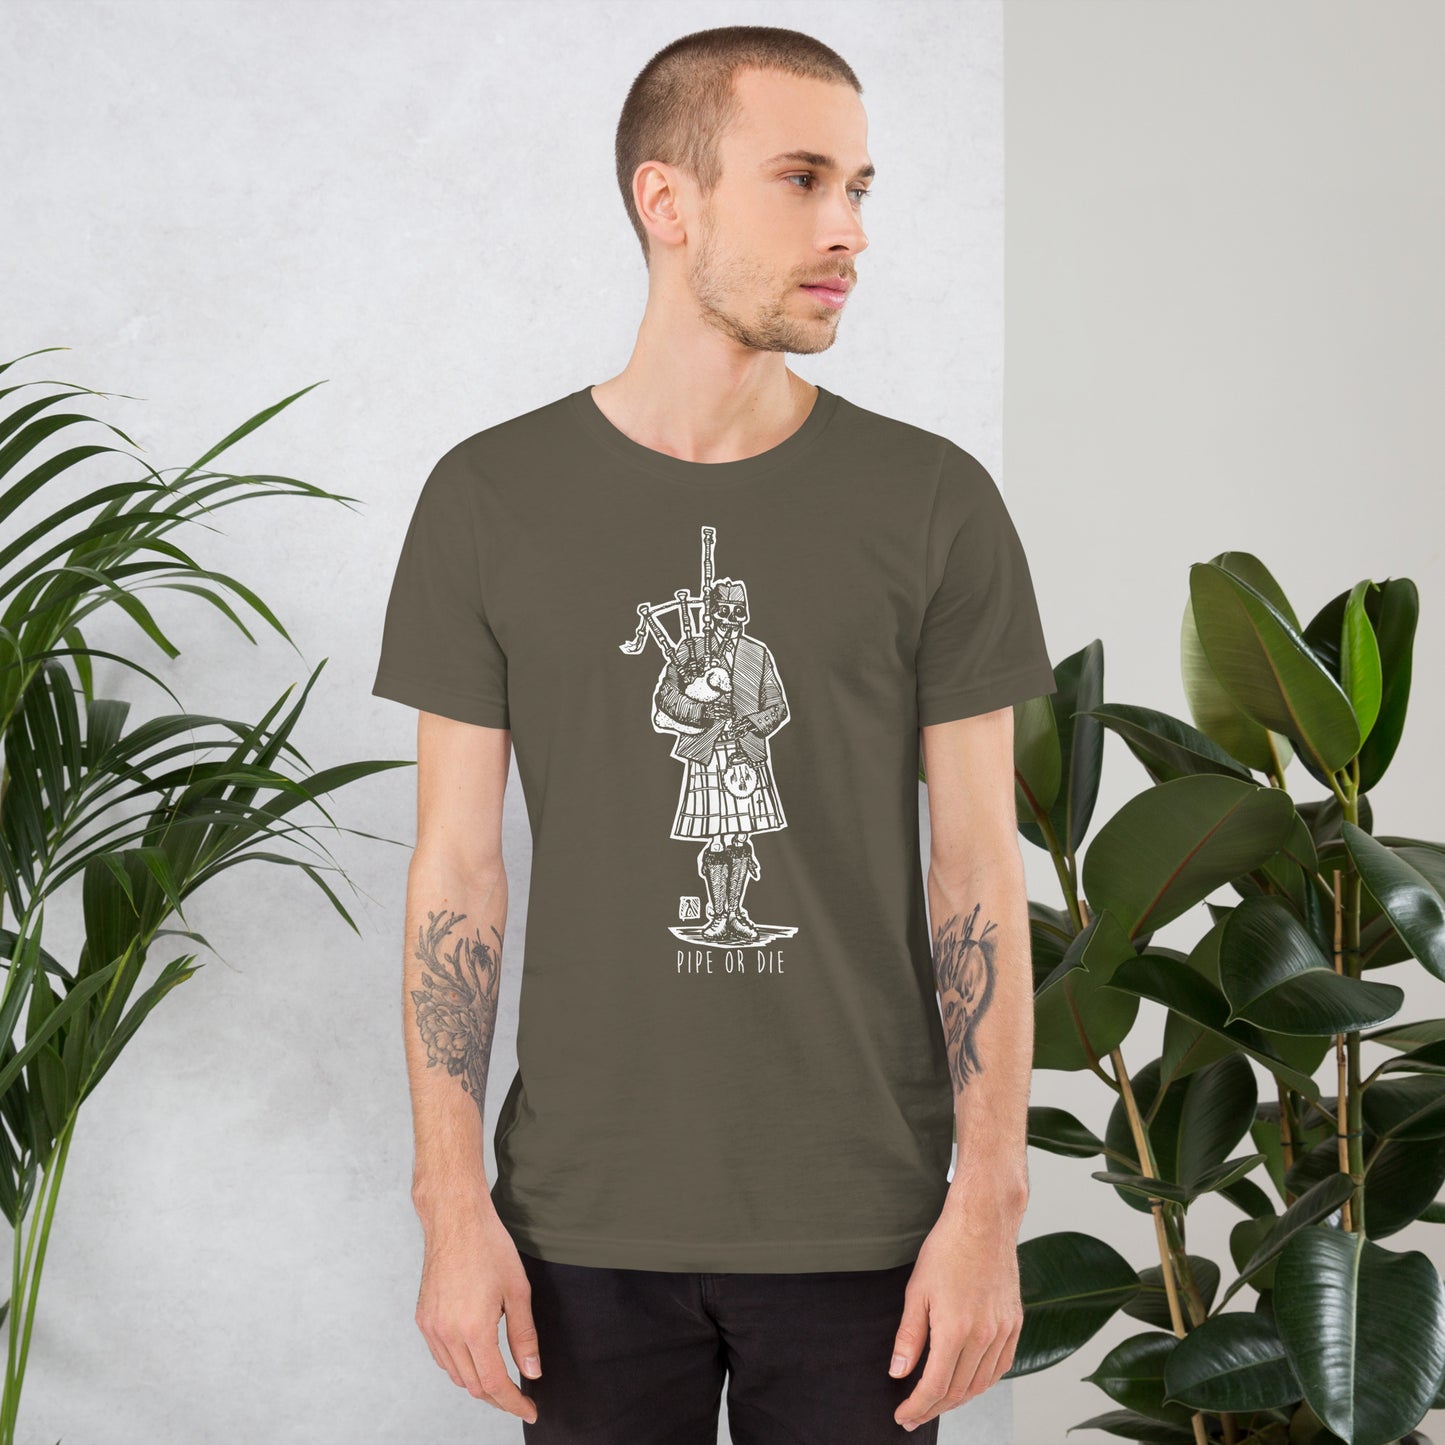 BellavanceInk: Pen And Ink Illustration Of Skeleton Highland Bagpipe Player Pipe Or Die On A Short Sleeve T-Shirt